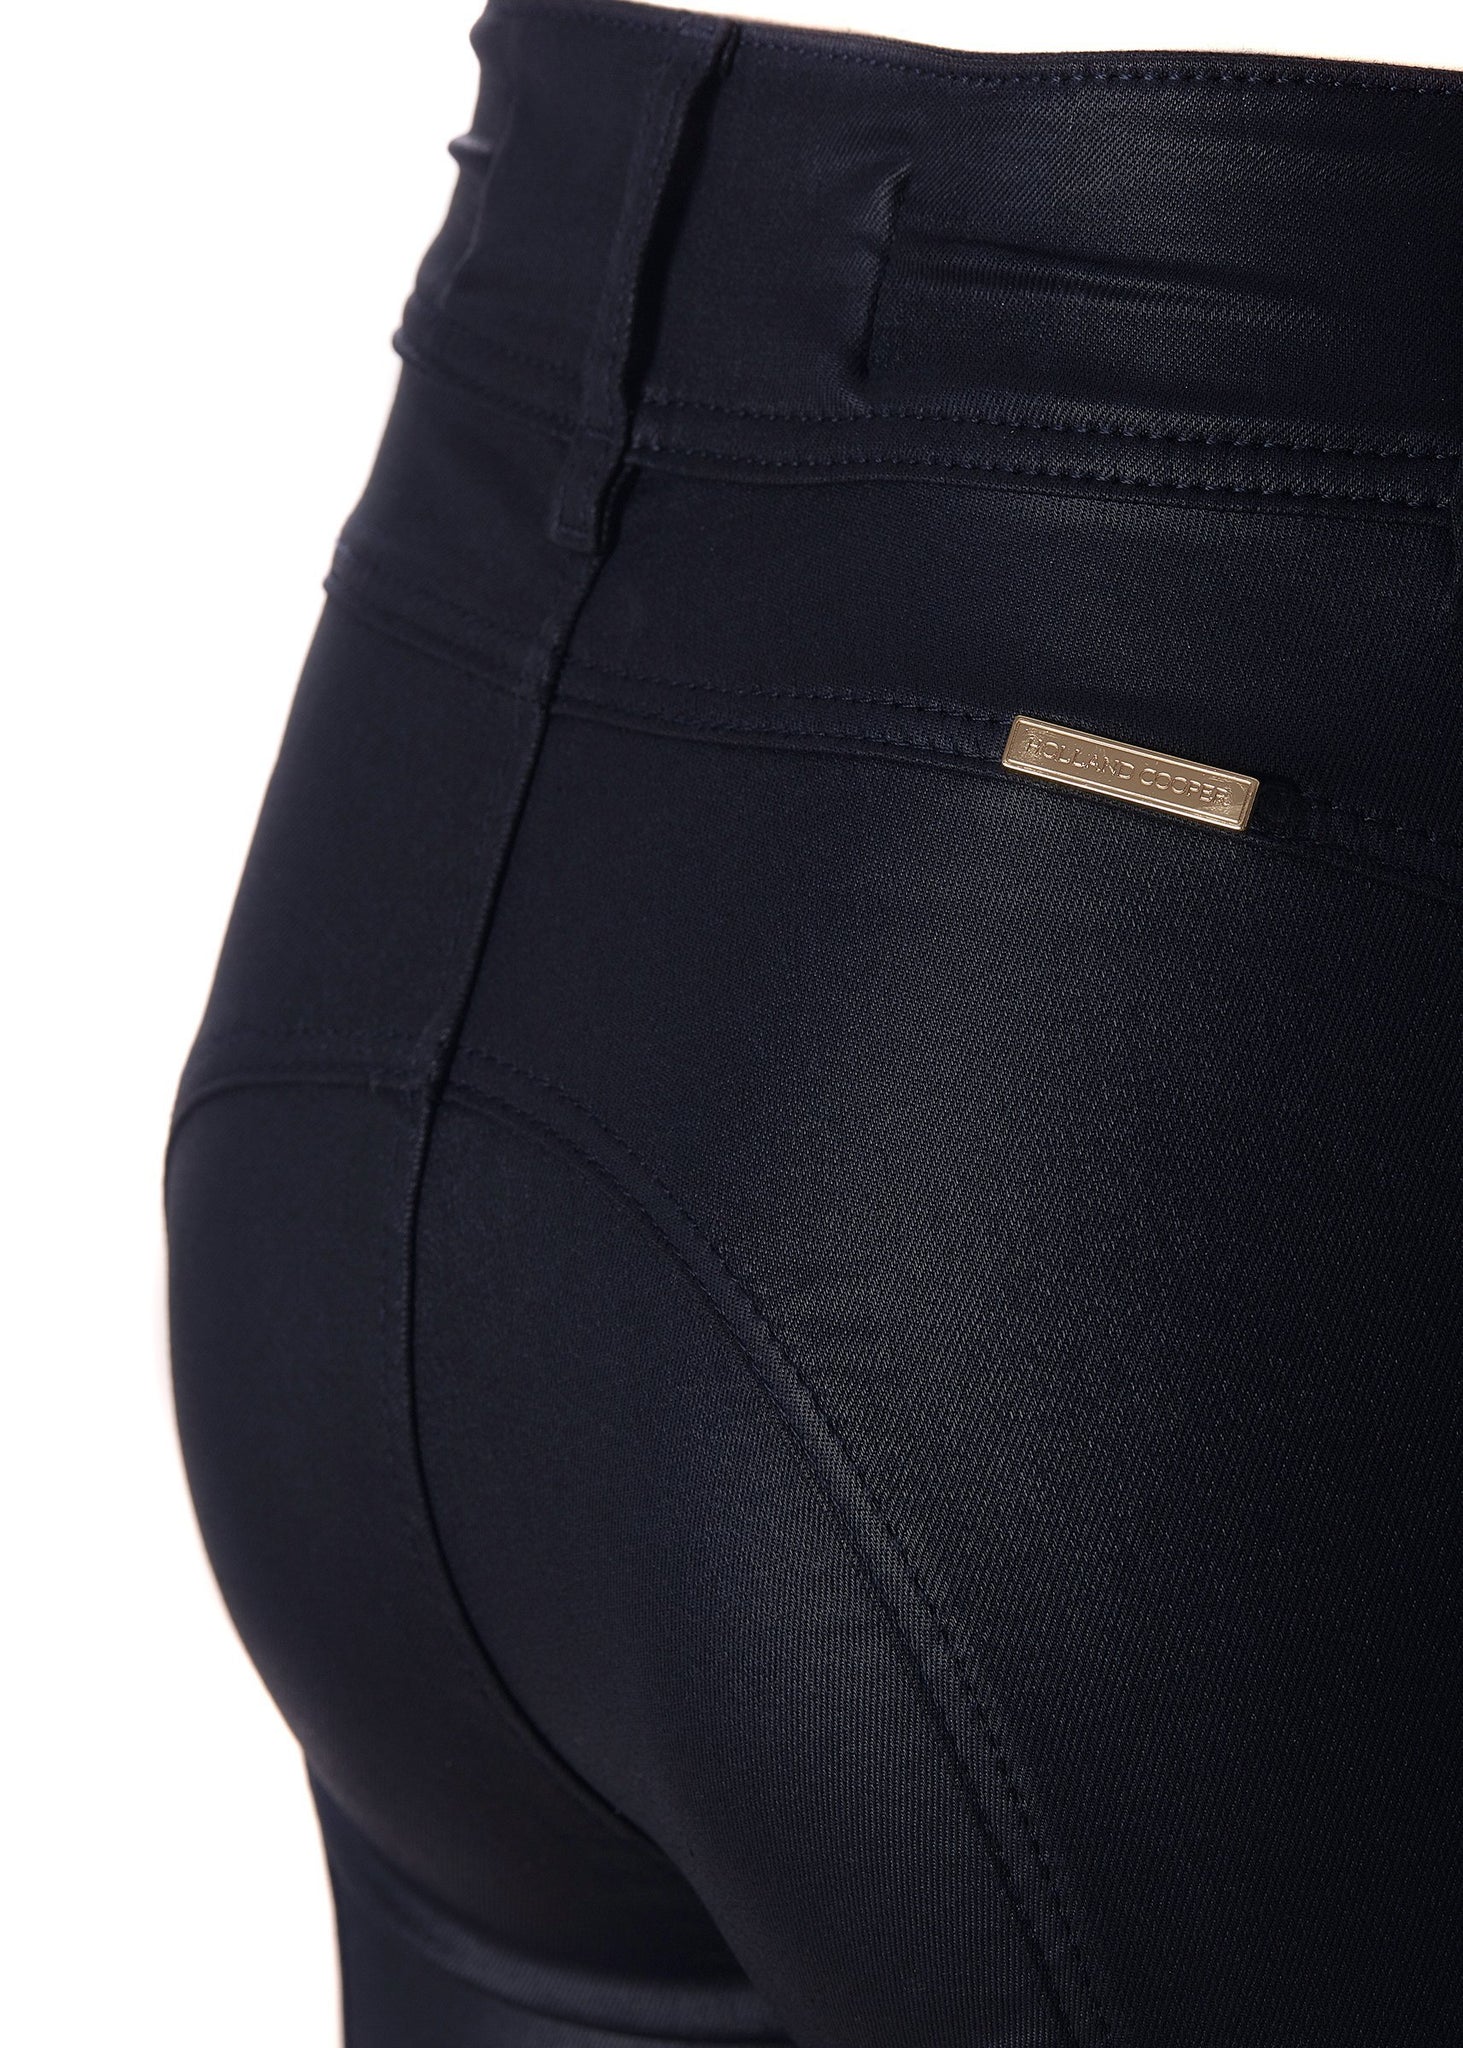 gold hardware detail on back of womens high rise blue coated skinny jean for a waxed look with jodhpur style seams with two open zip pockets to the front with HC branded pulls